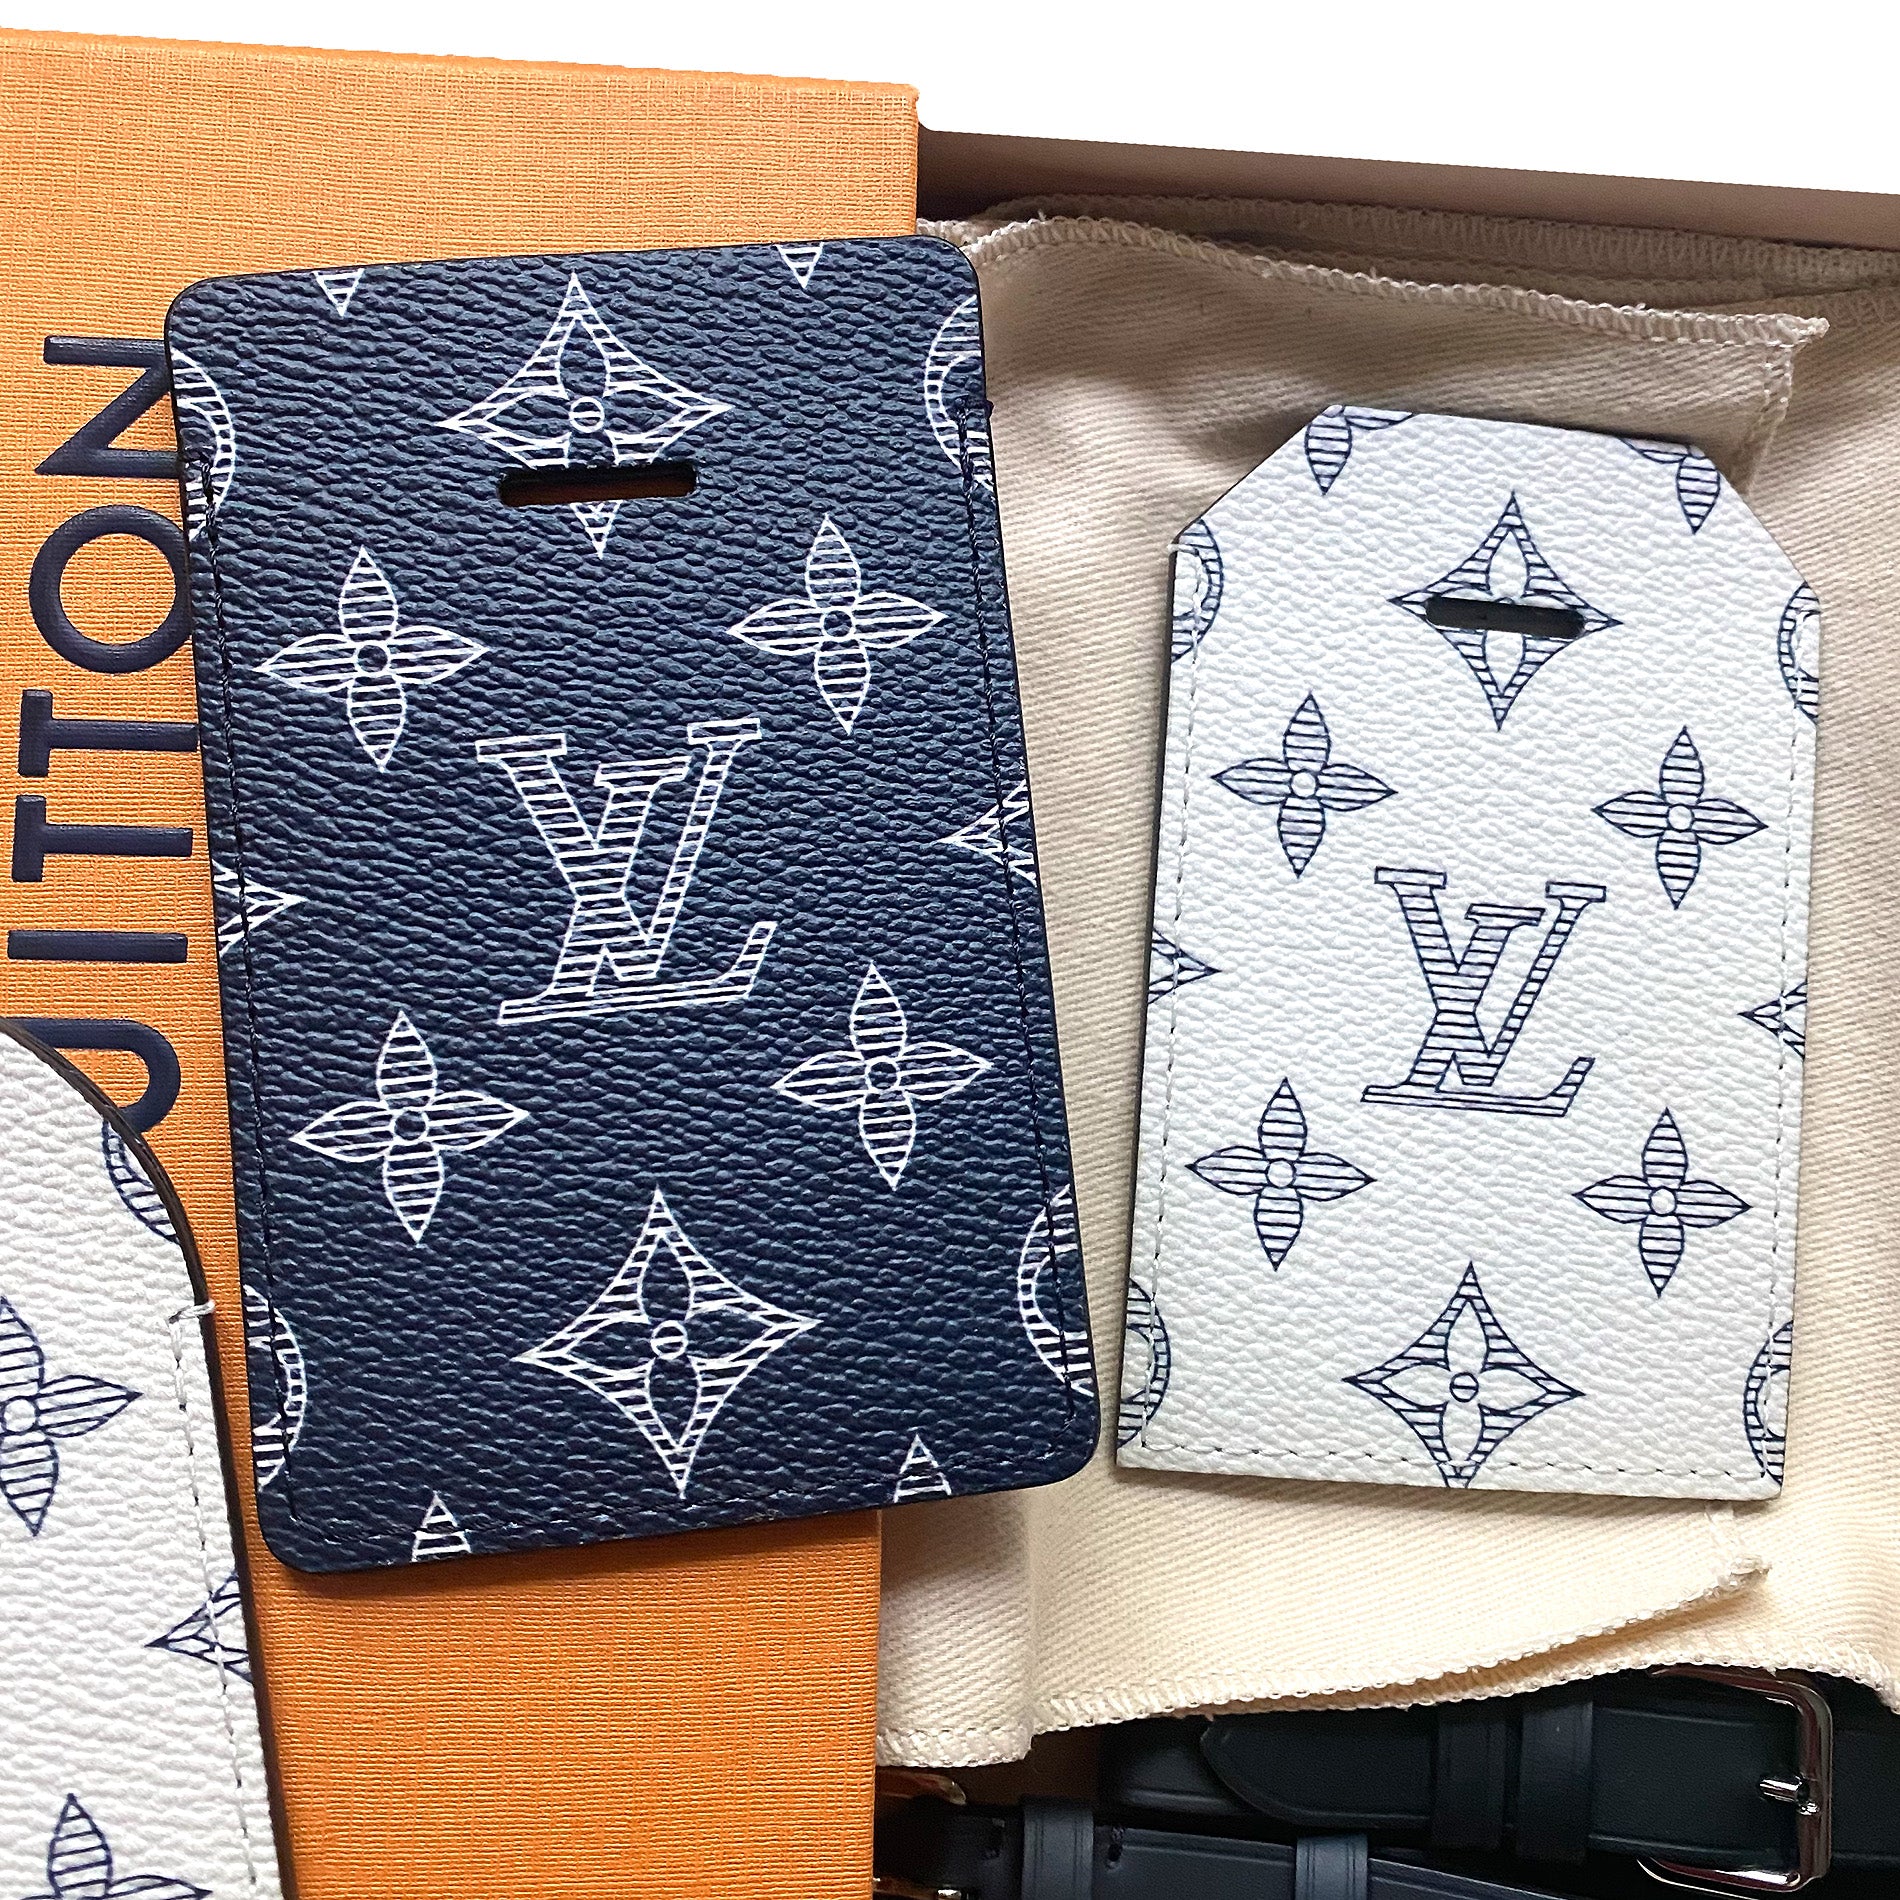 New in Box Louis Vuitton Limited Edition Luggage Name Tag Saint